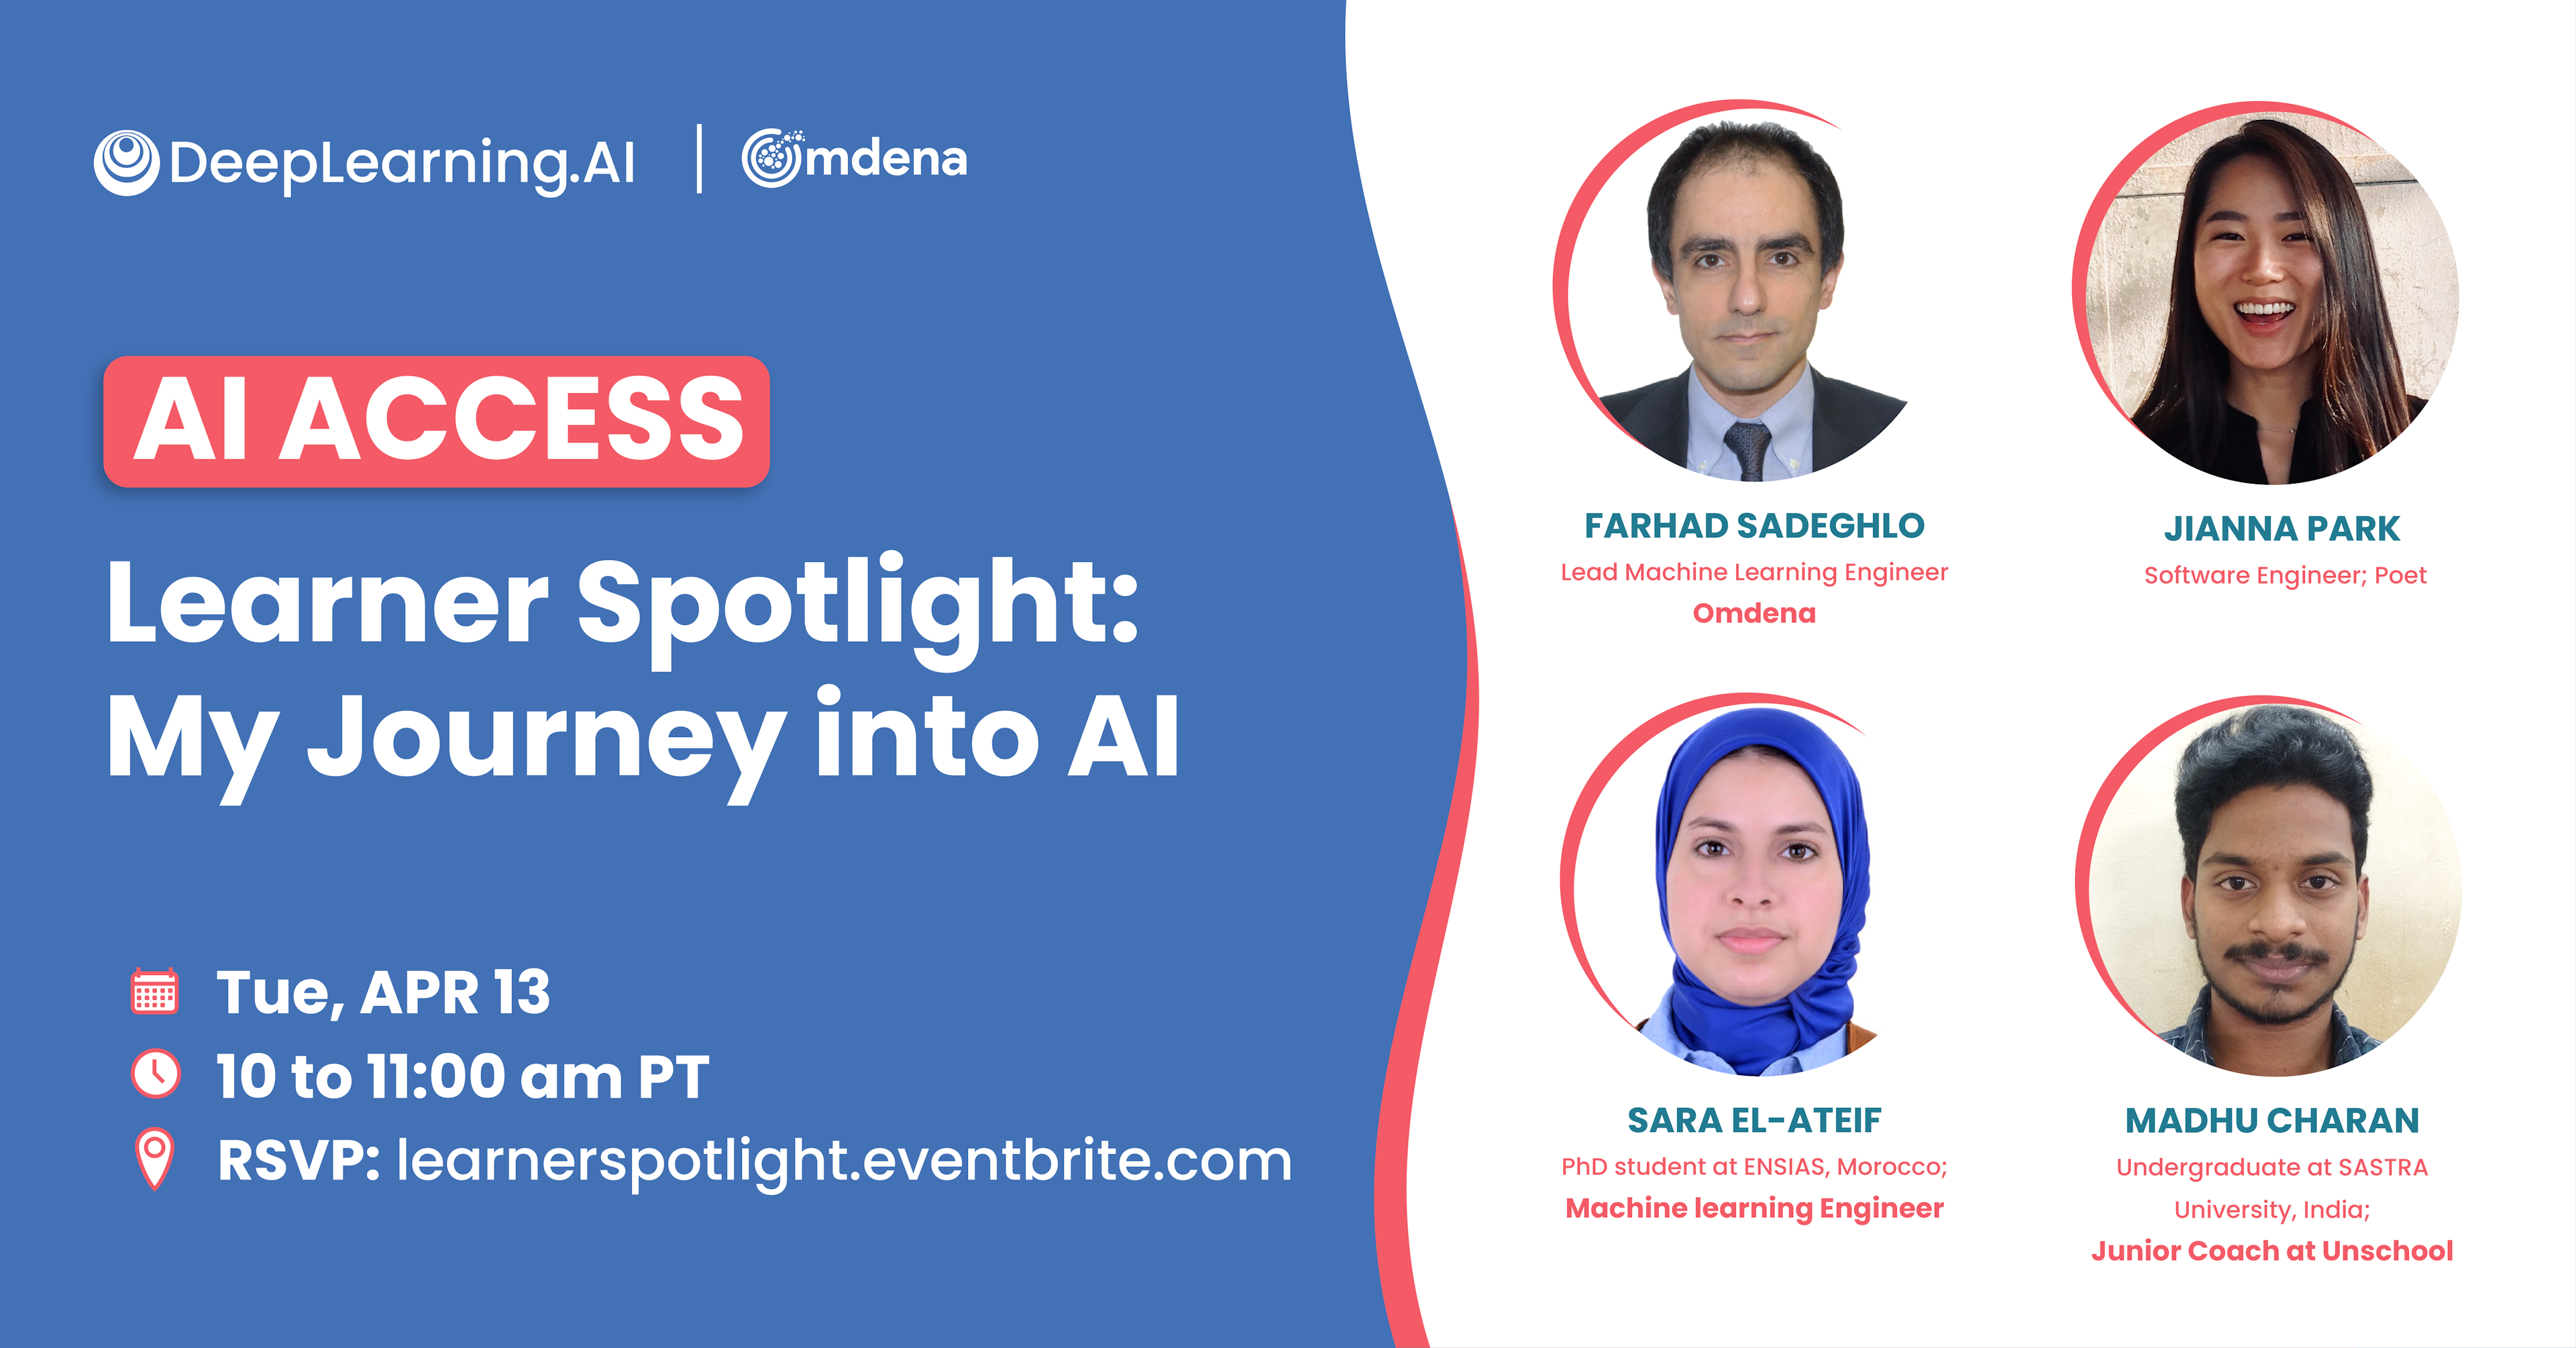 My Journey into AI – learning resources recommended by the speakers